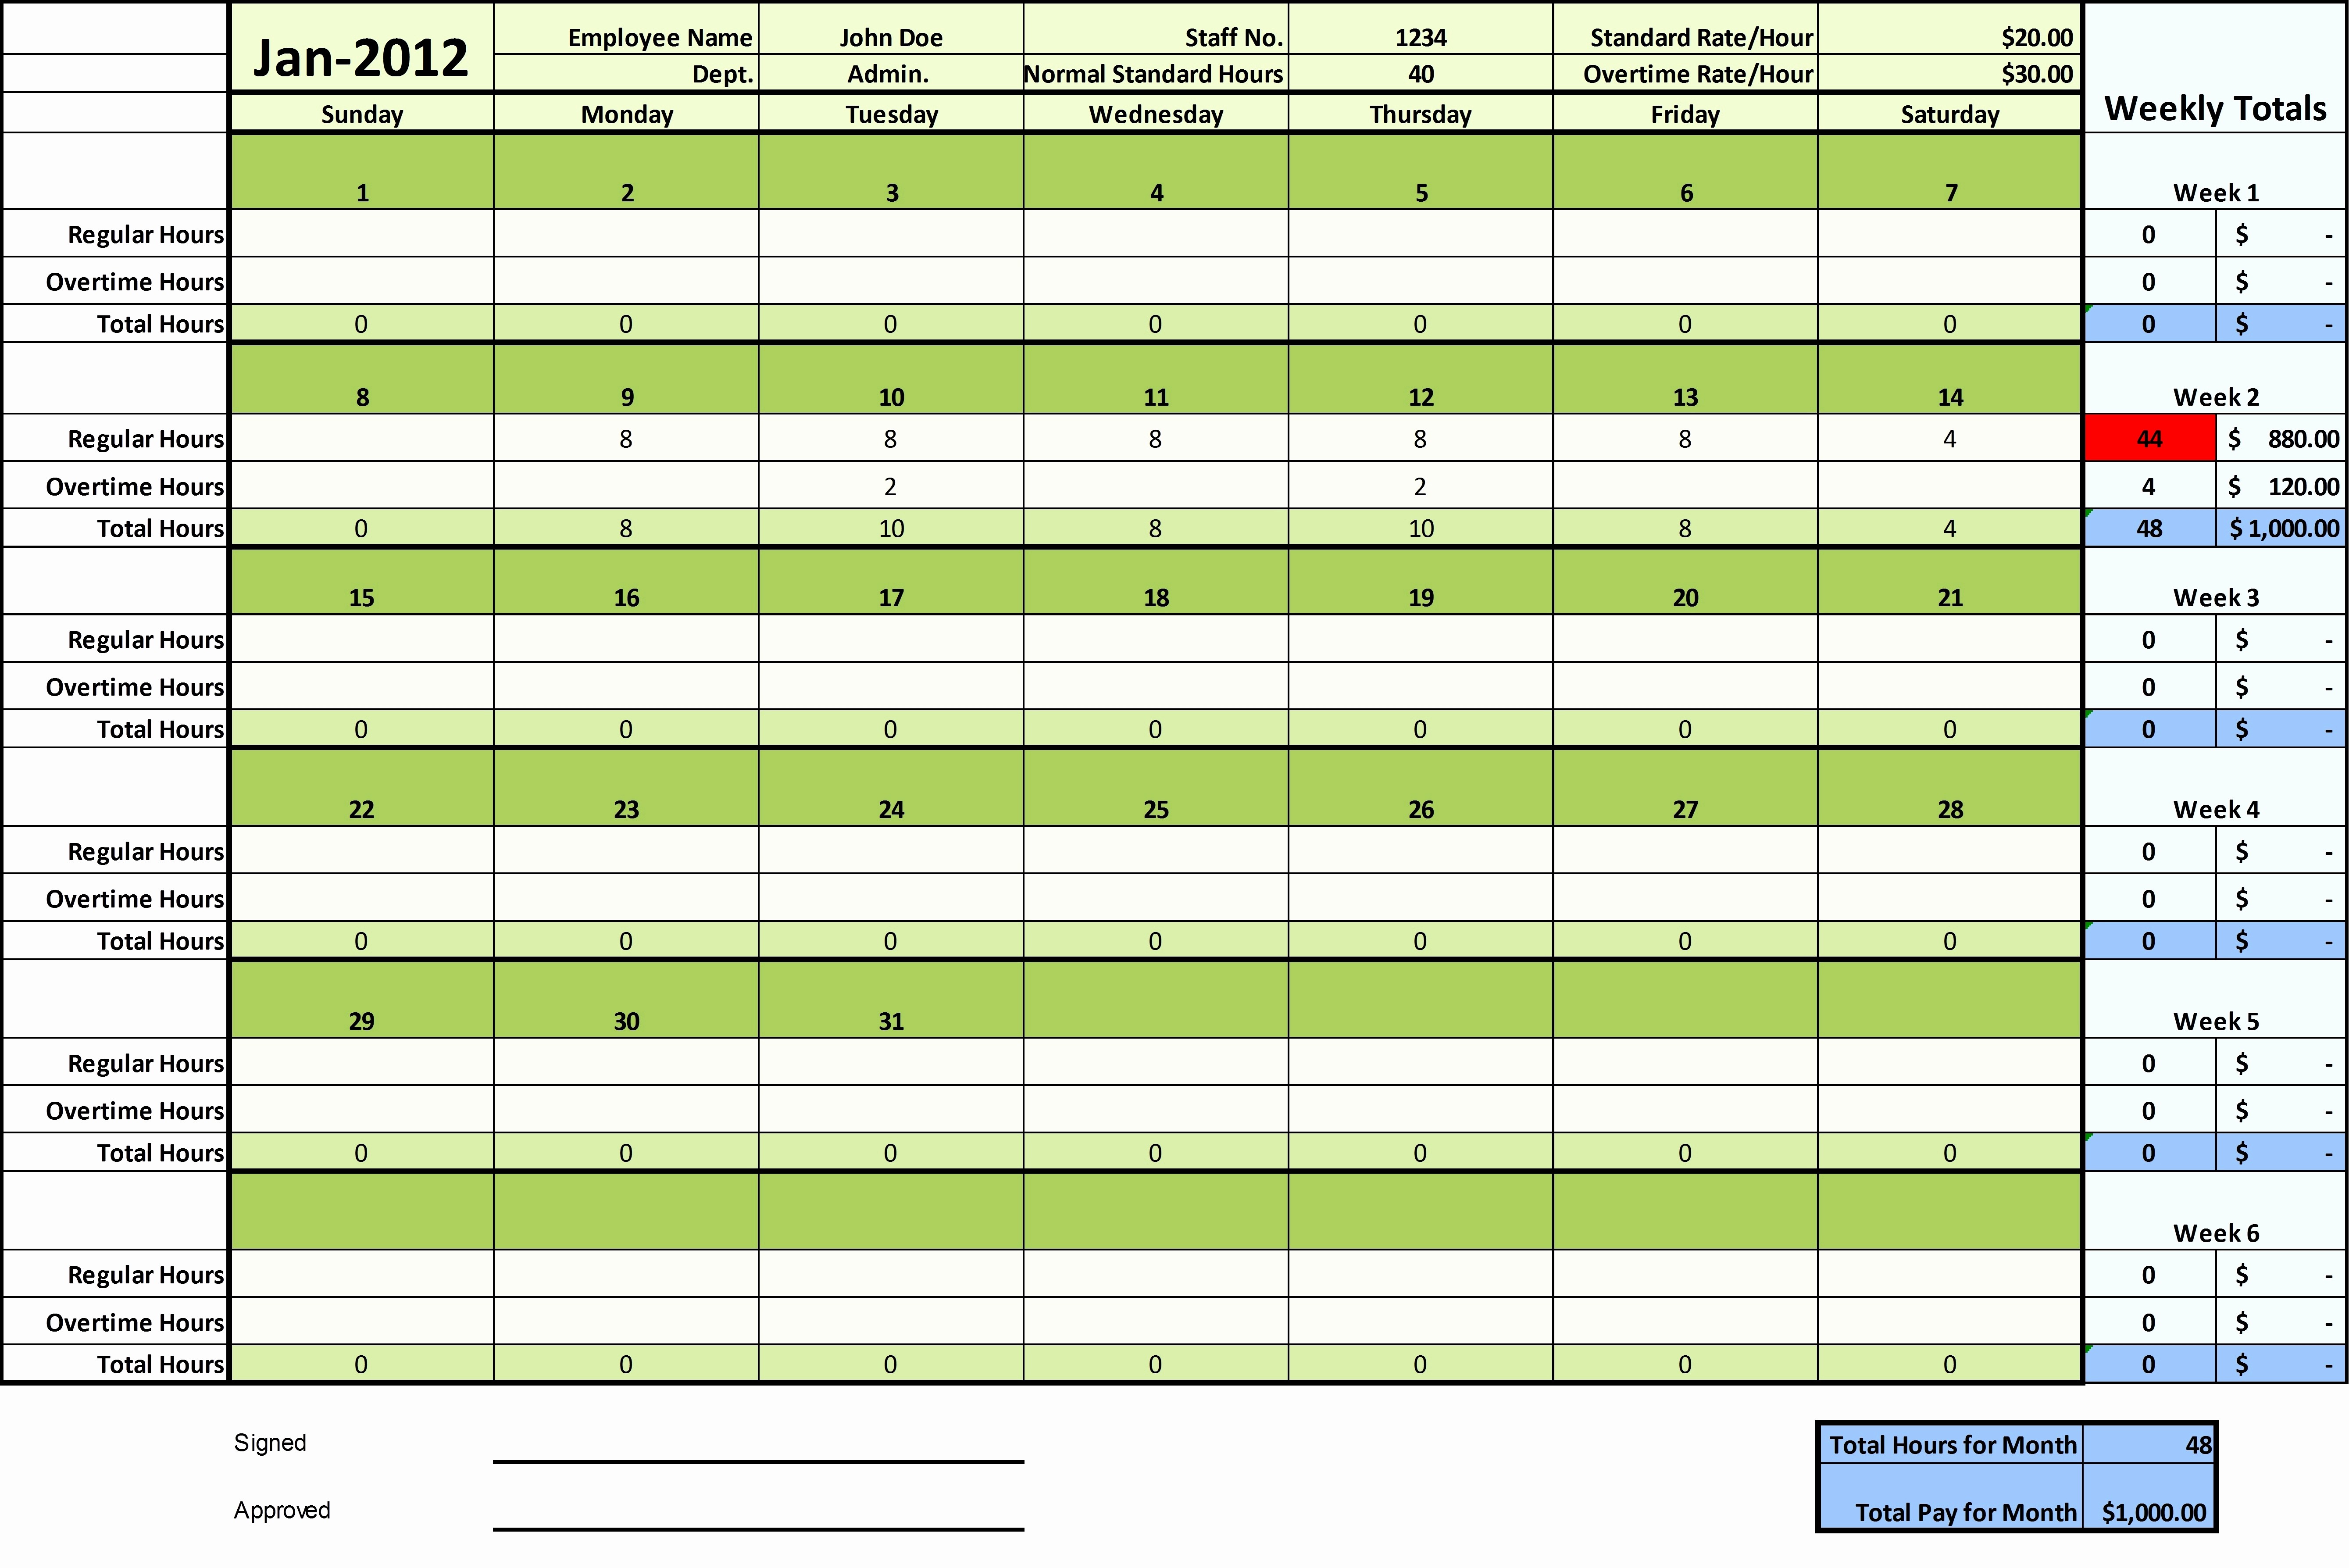 Grant Tracking Spreadsheet Example petermcfarland us